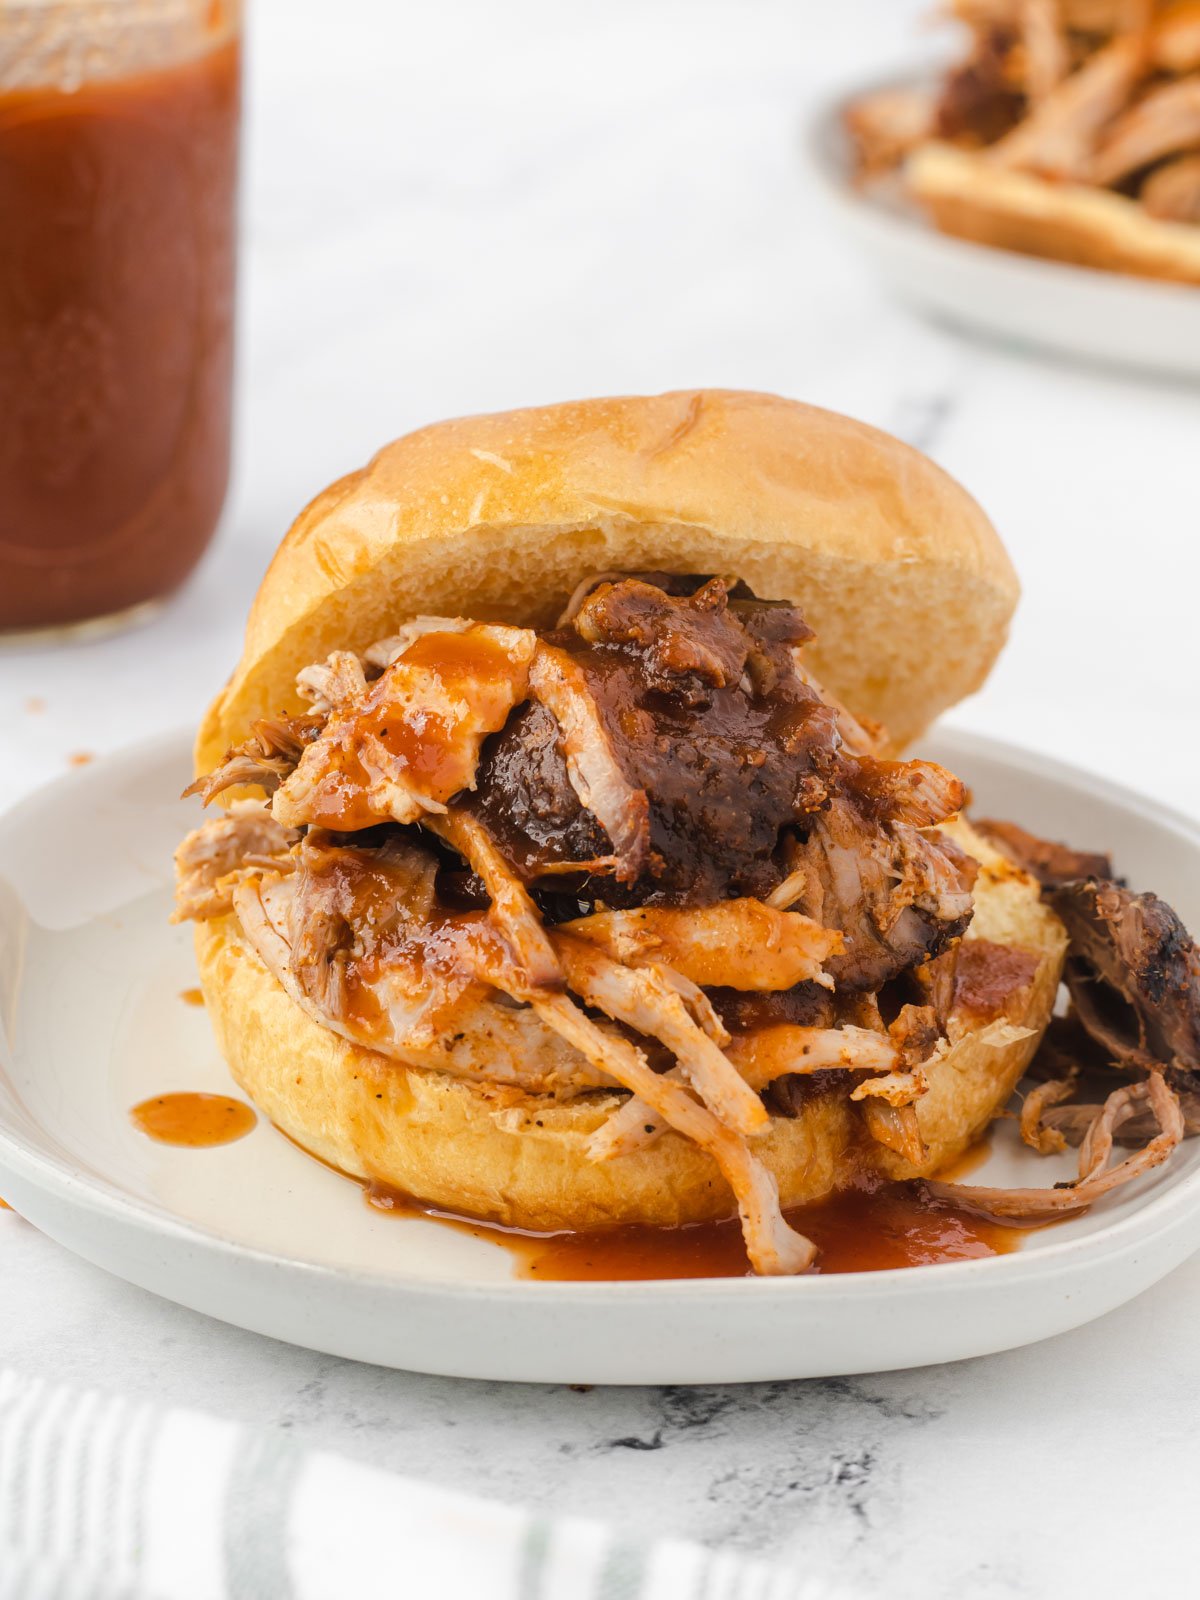 Pulled pork sandwich with pools of bbq sauce and a jar of sauce in the background.